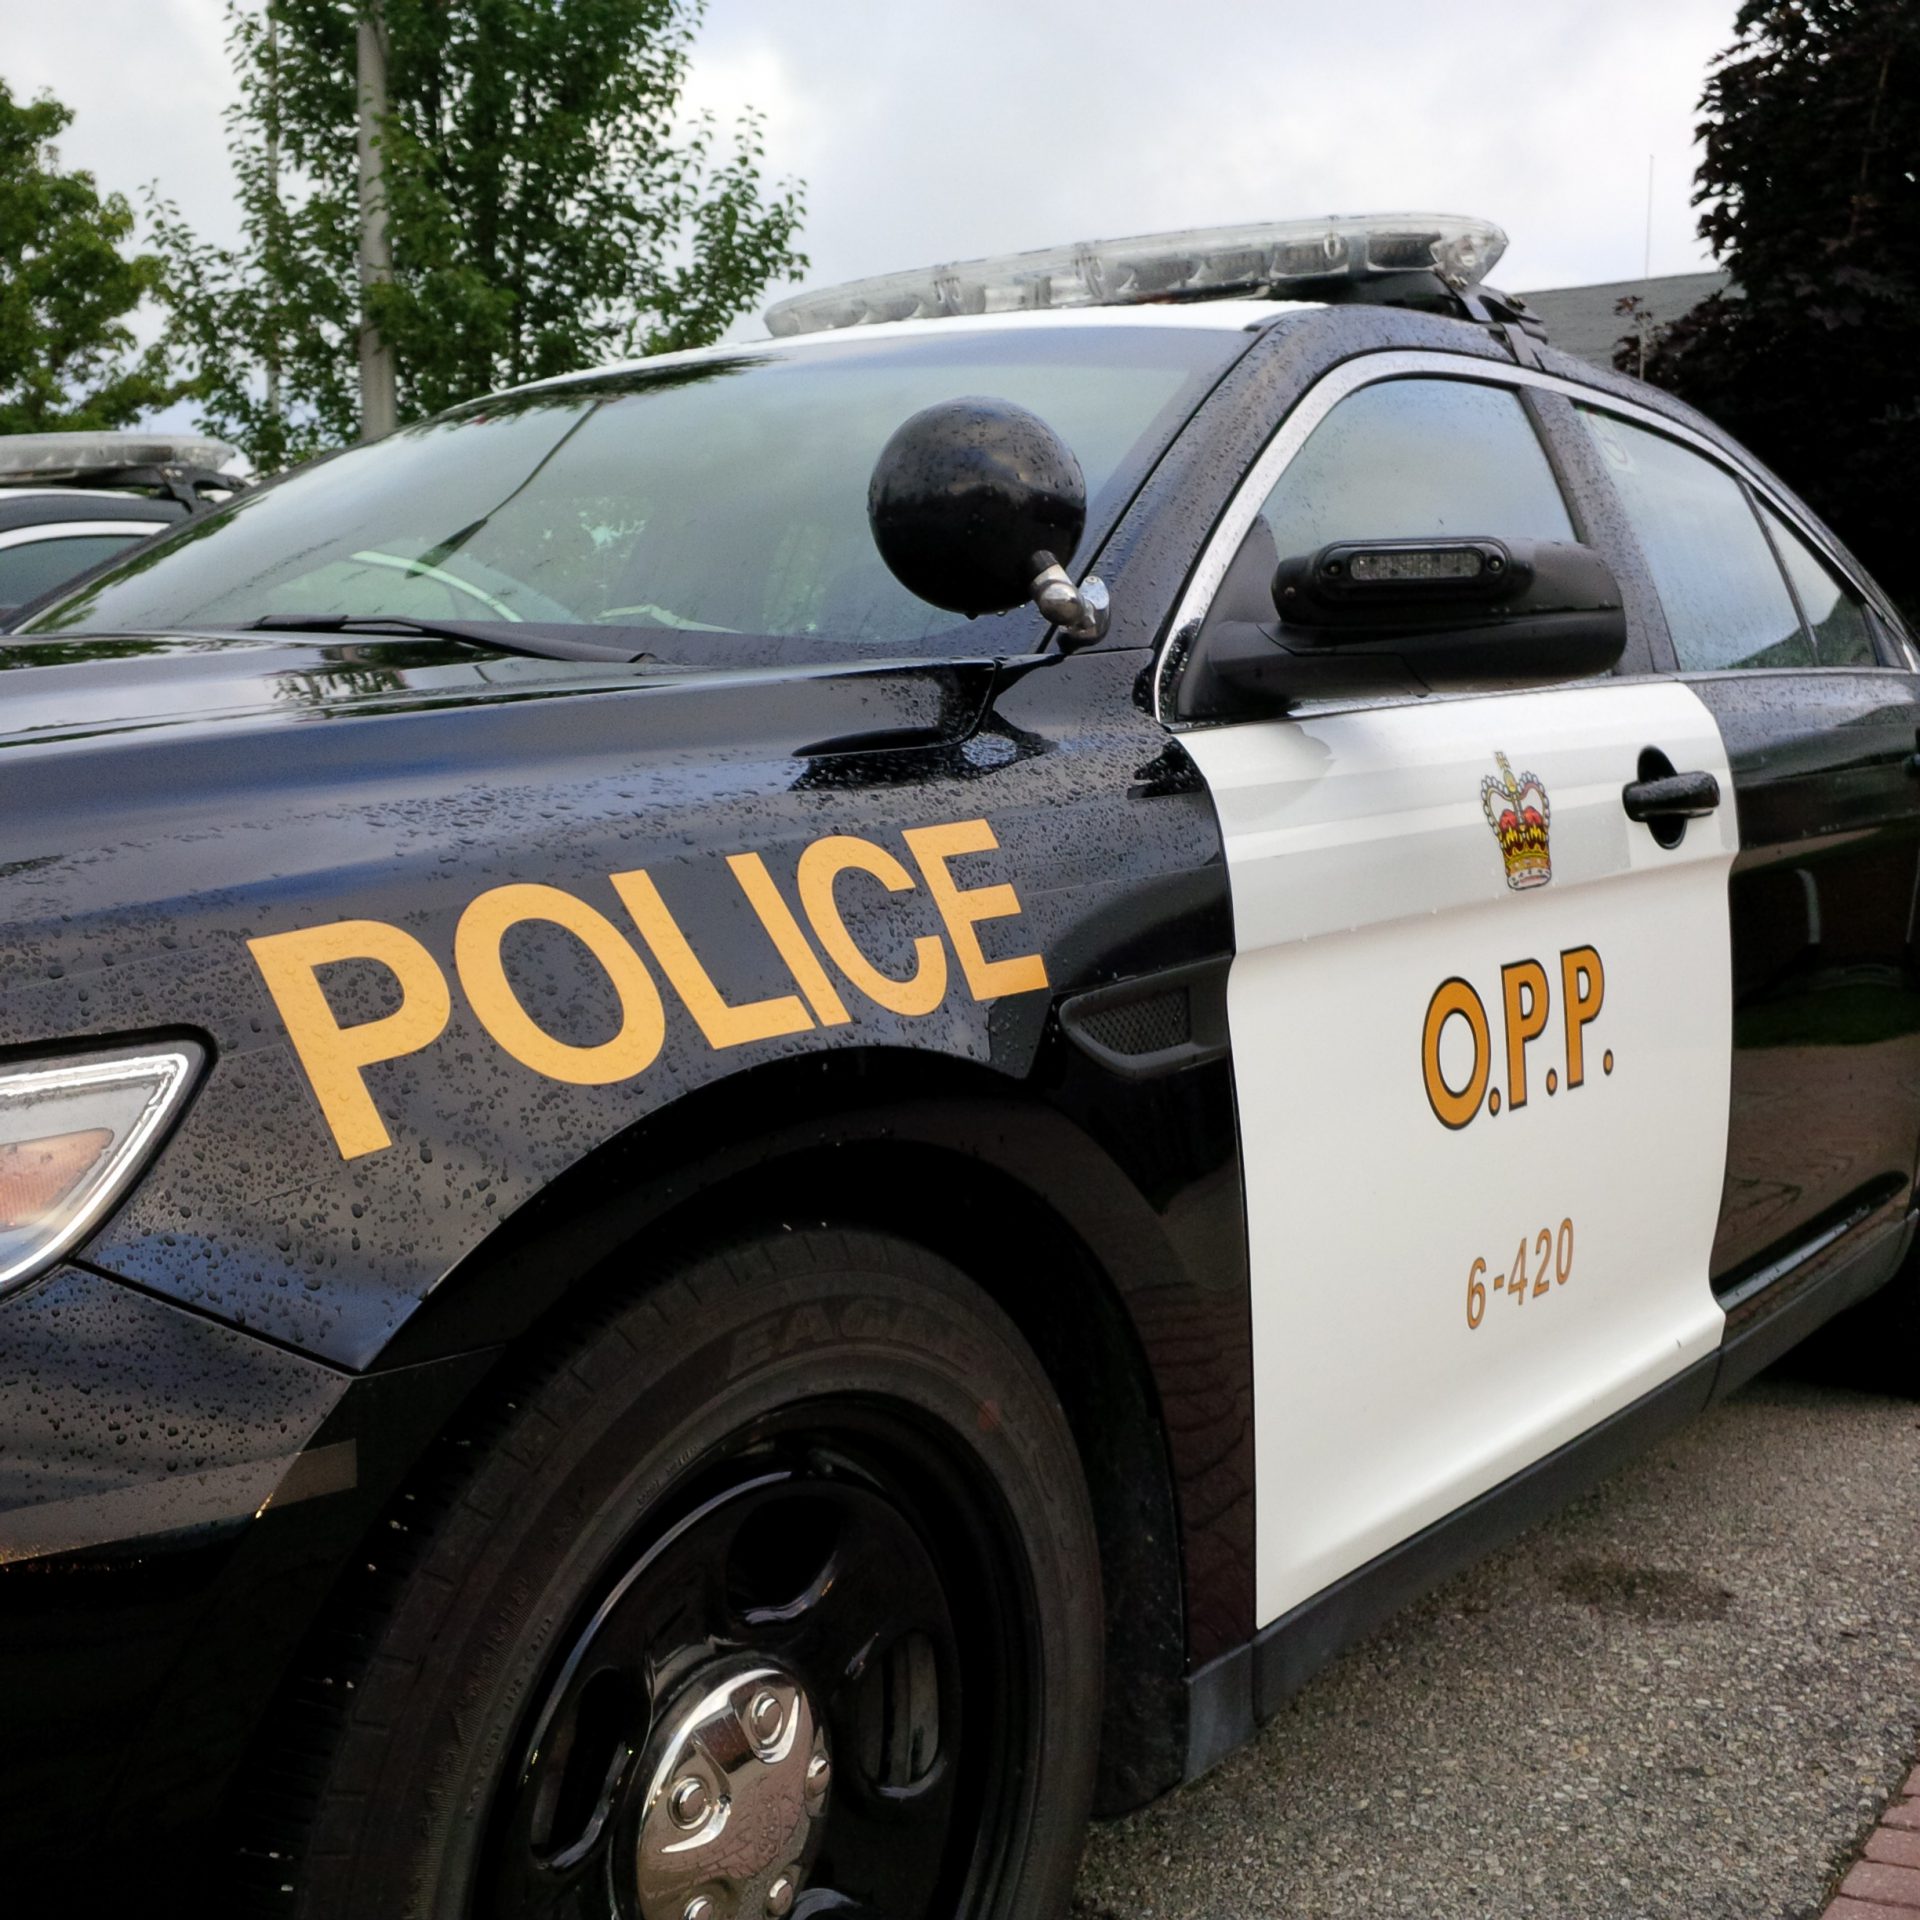 Foul play not suspected in man's death - My Stratford Now